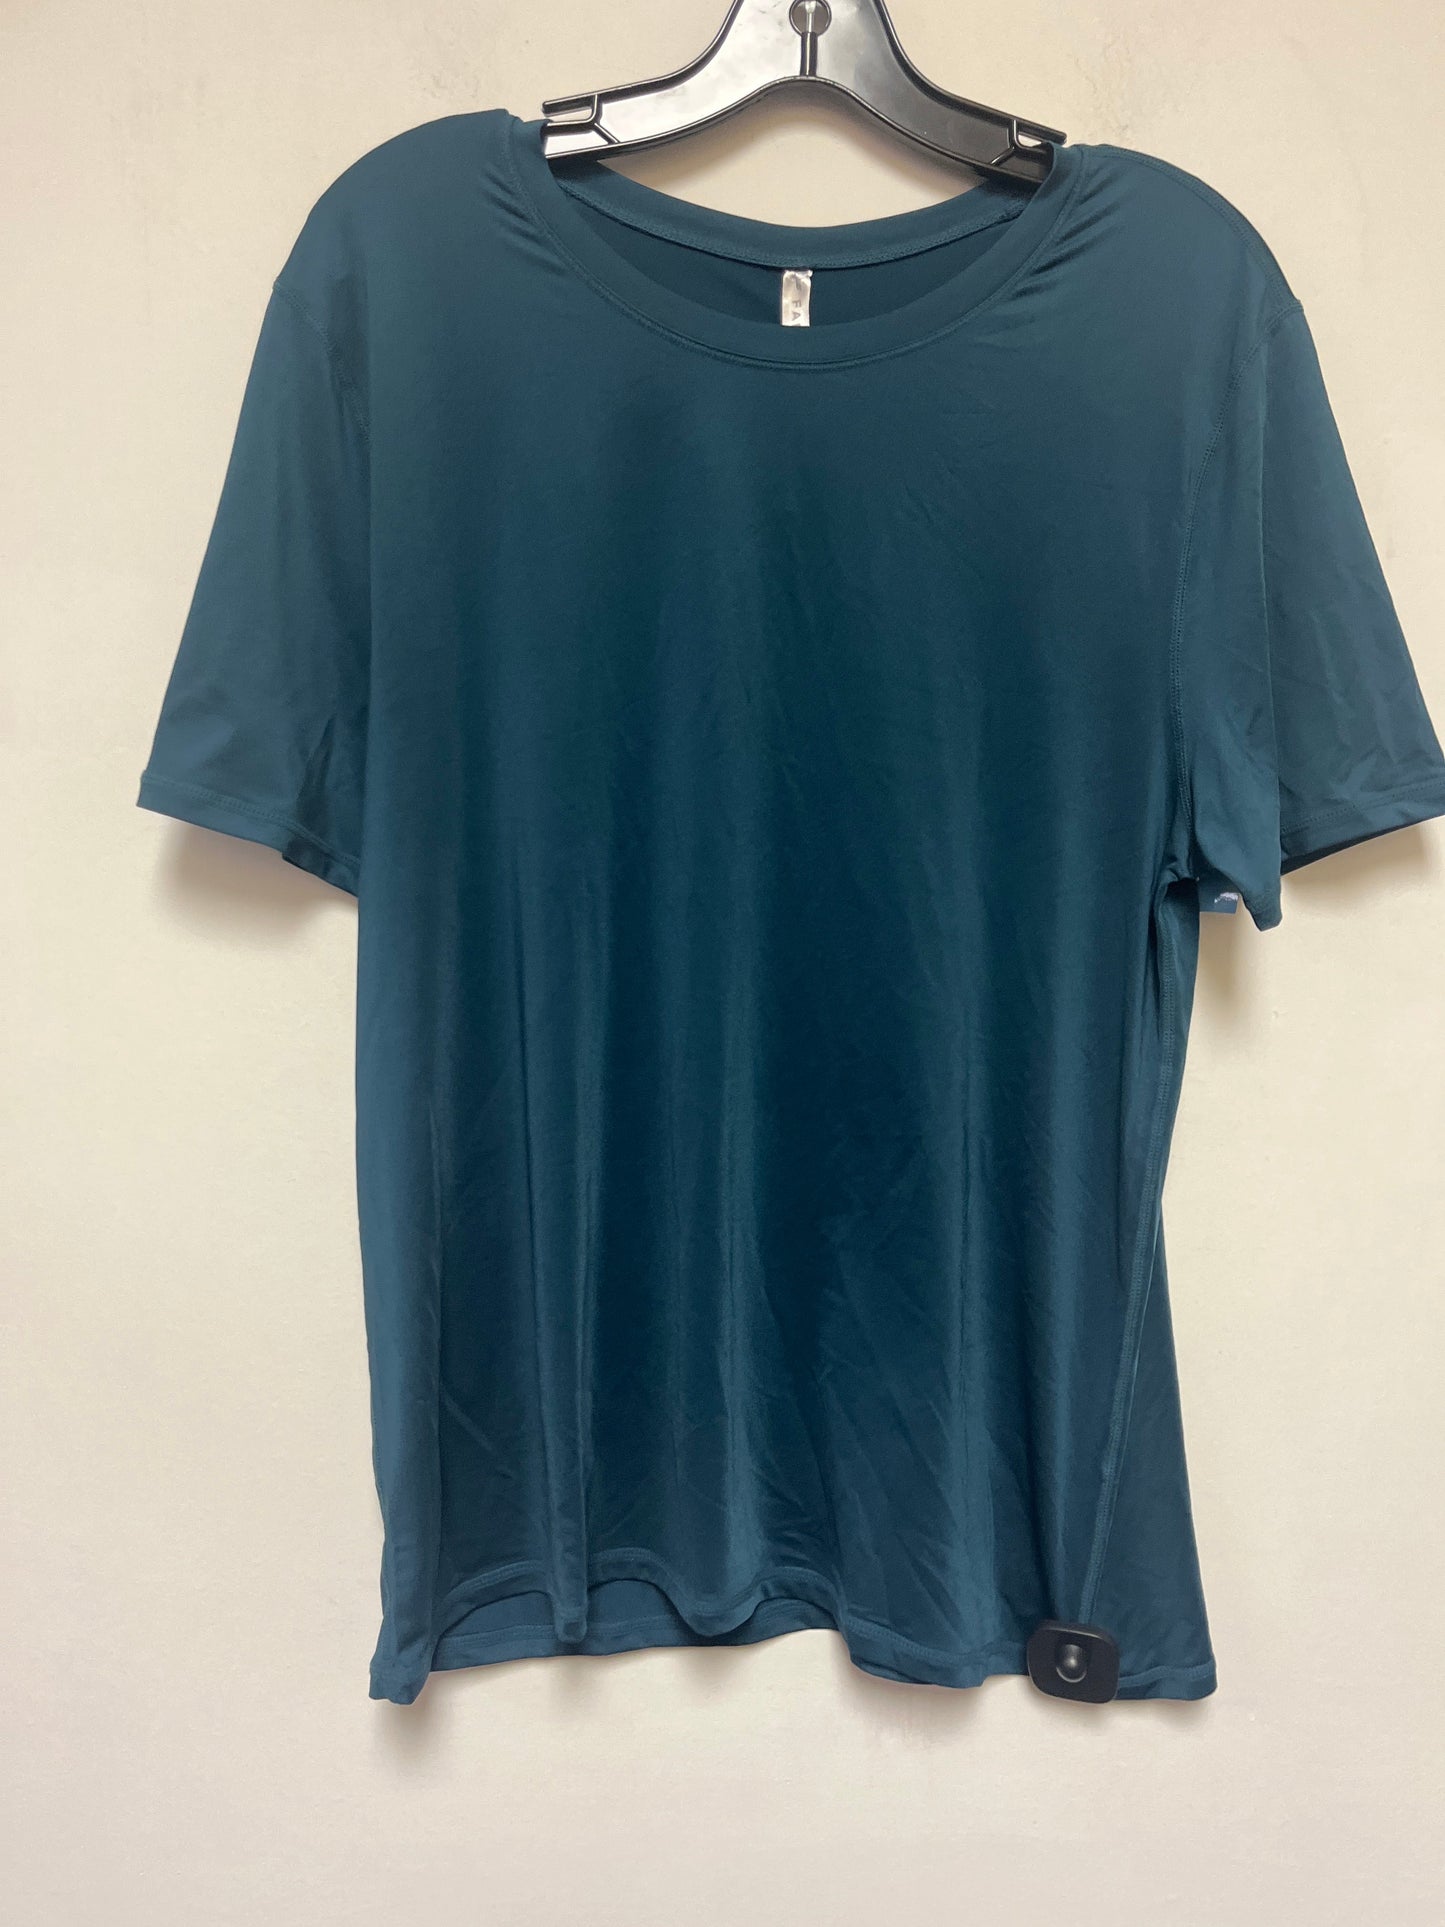 Athletic Top Short Sleeve By Fabletics  Size: Xxl